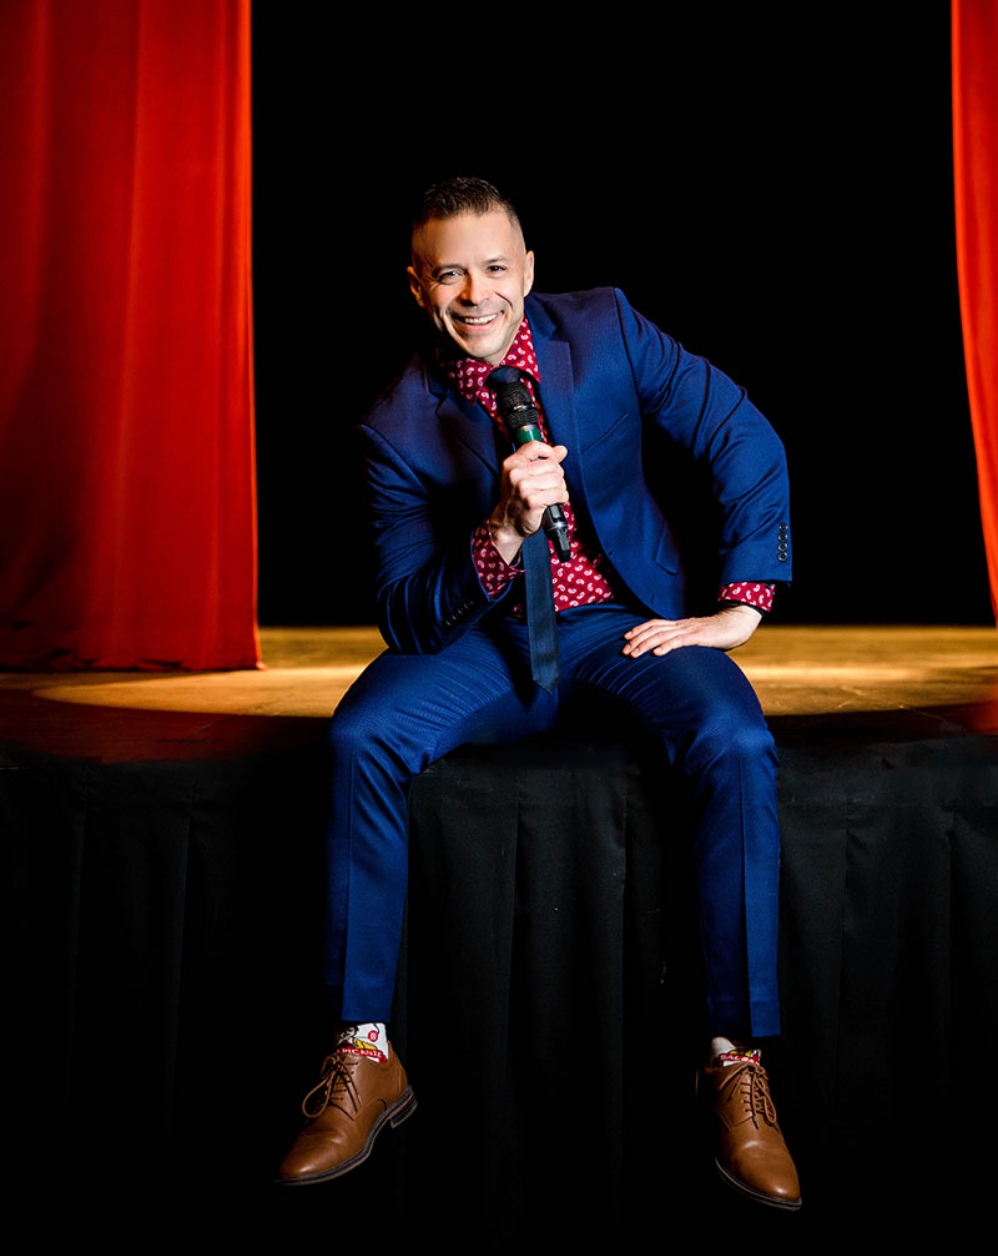 Erik Dominguez on stage with a microphone wearing a blue suit